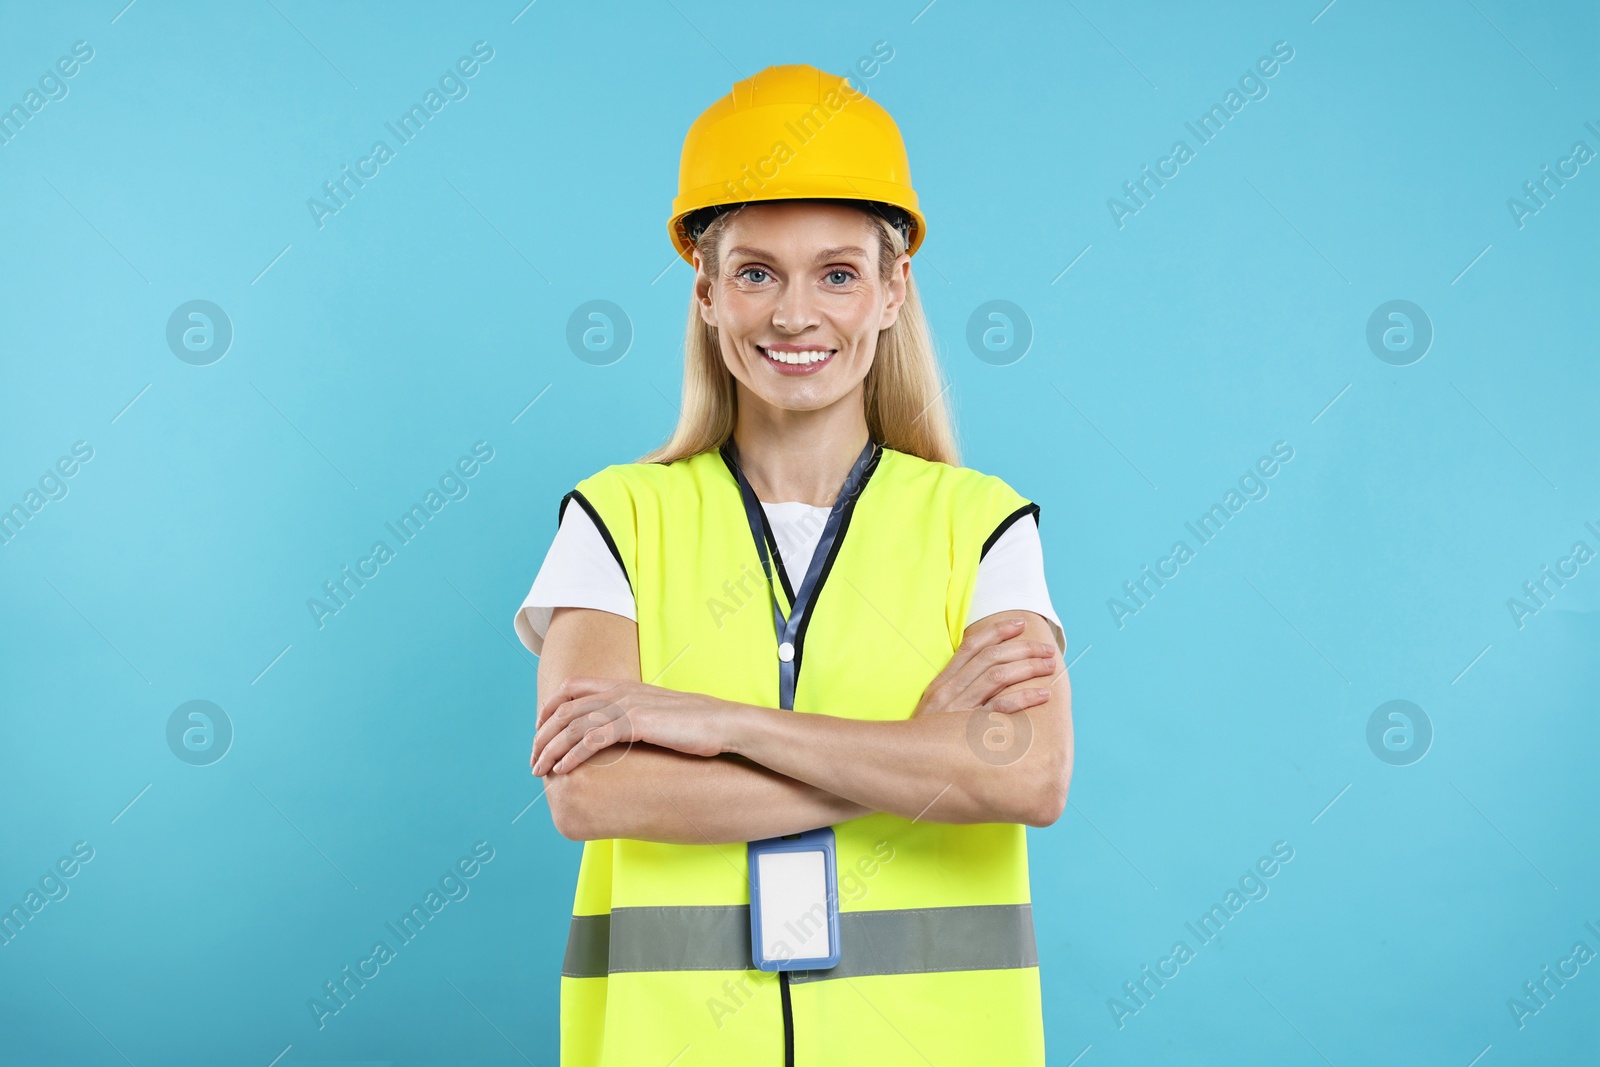 Photo of Engineer with hard hat and badge on light blue background